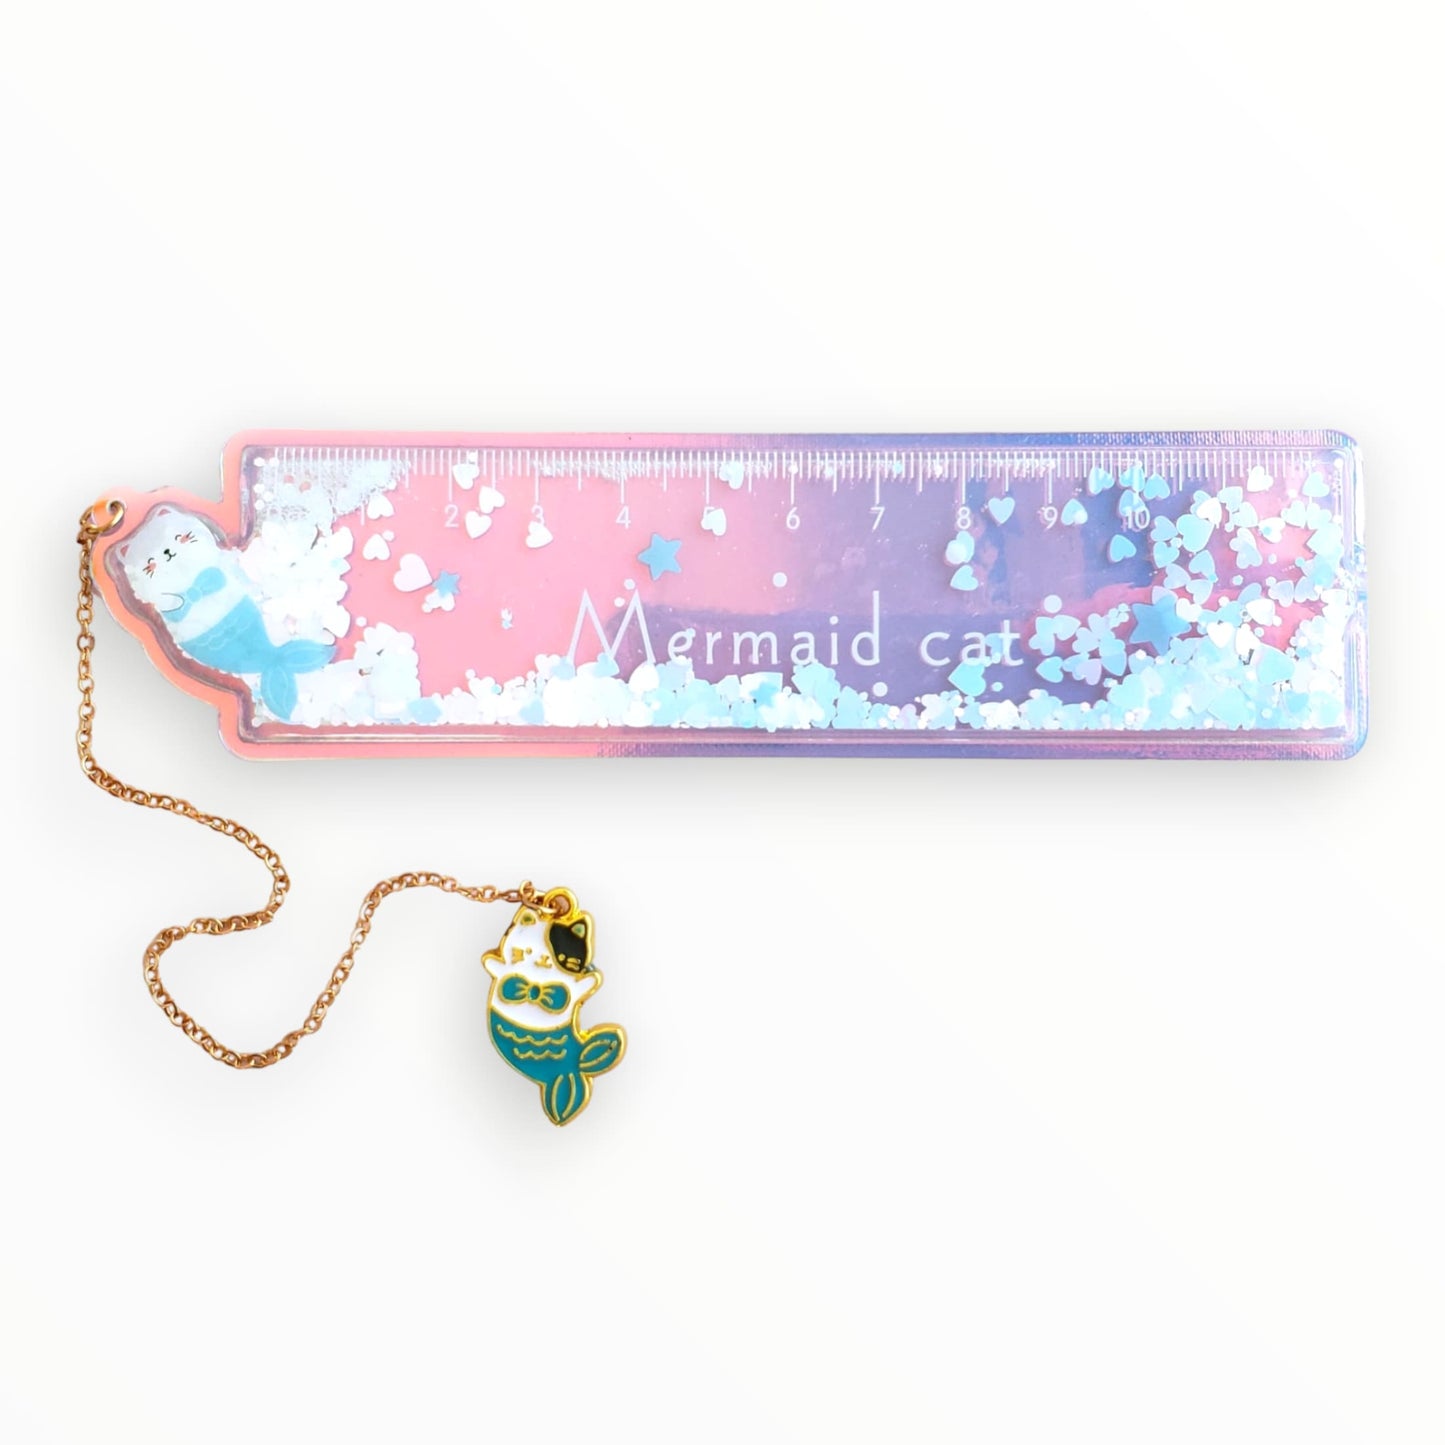 Mermaid Cat Liquid Quicksand Ruler from Confetti Kitty, Only 7.99